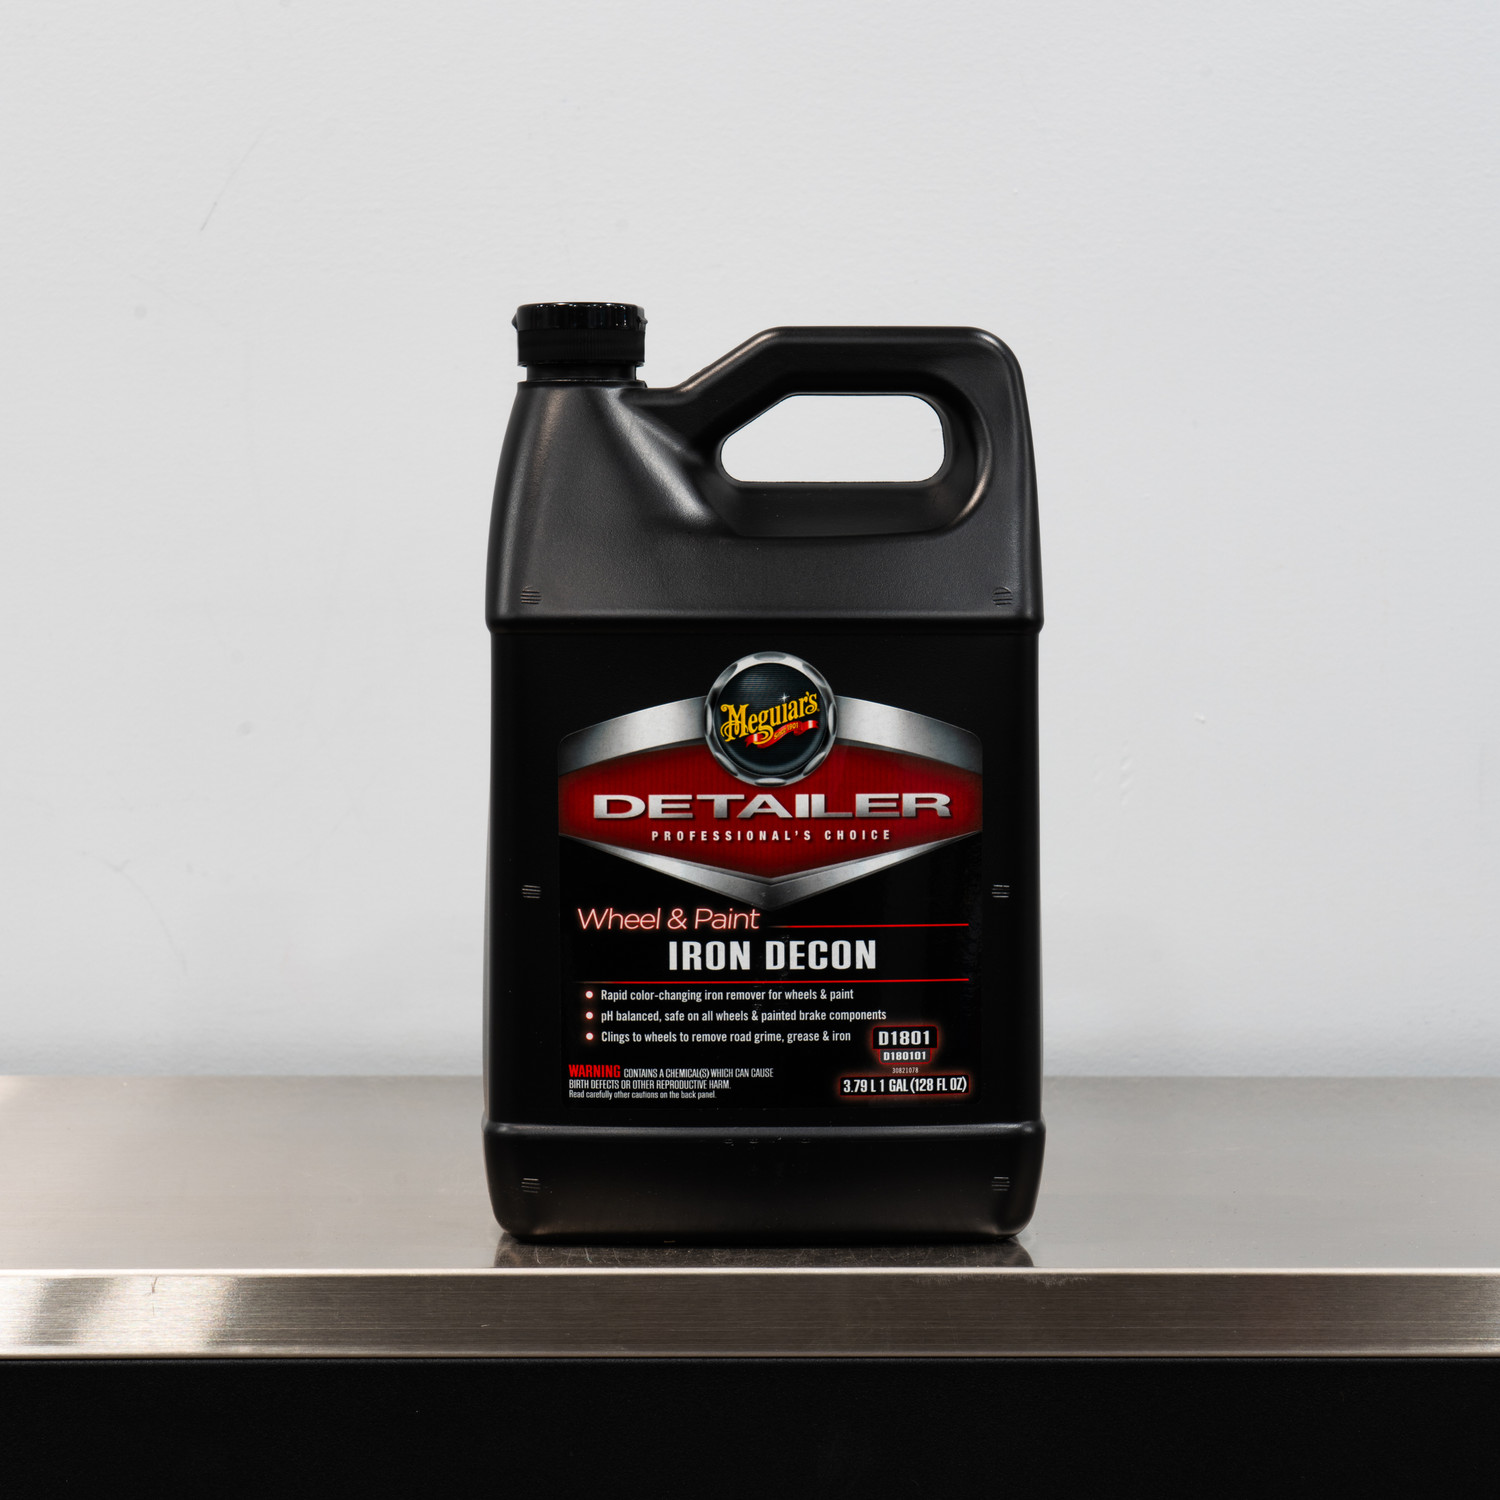 Fallout - Acid Free Iron Remover for Rims and Body Panels 1 Gallon